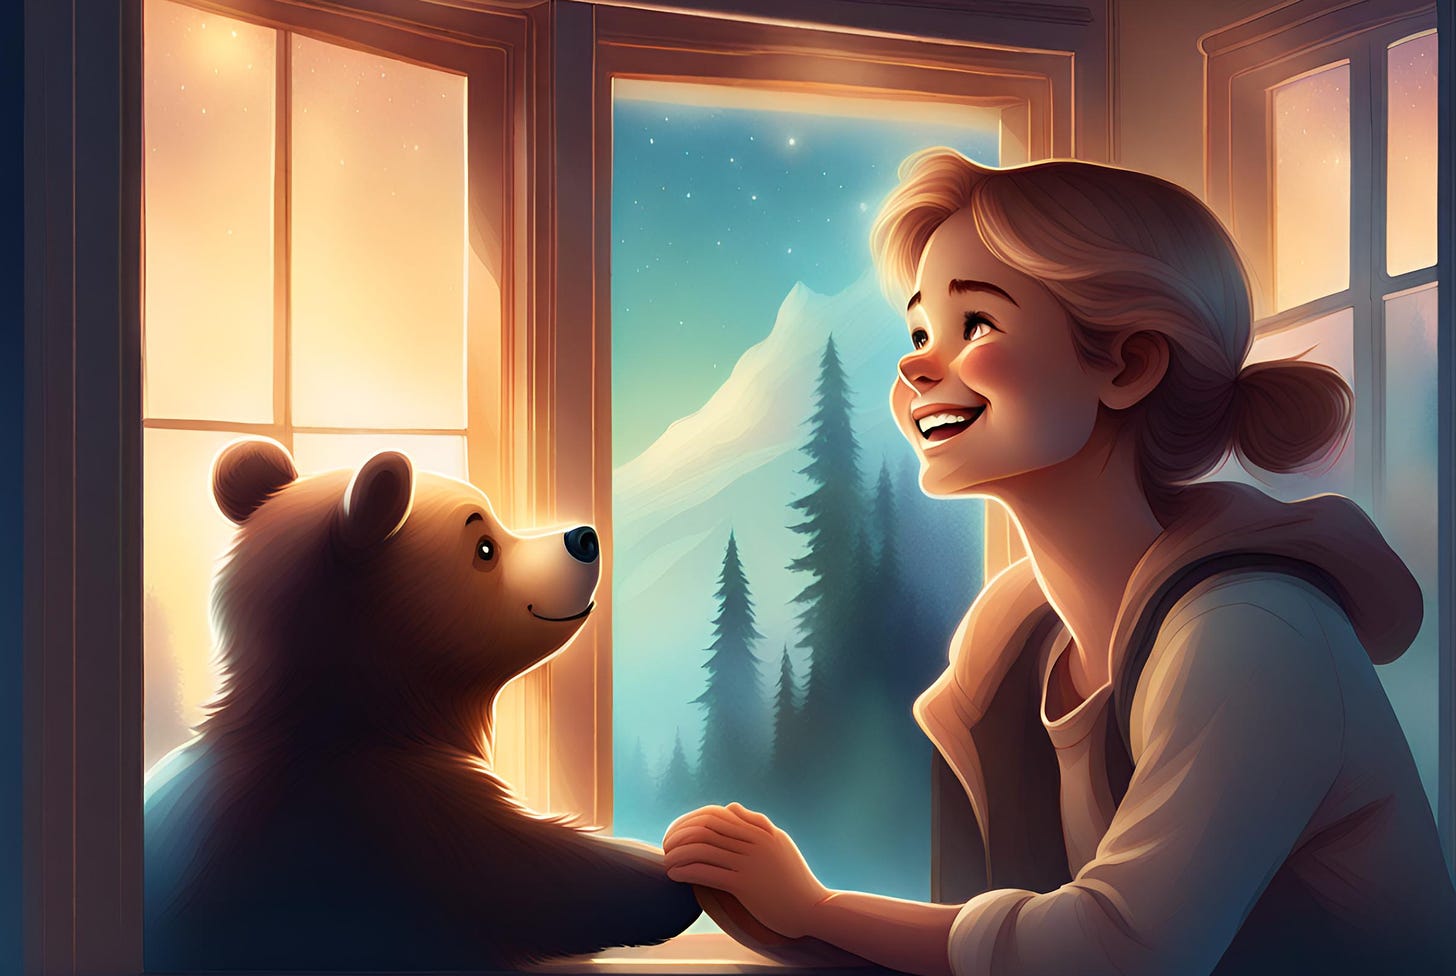 Illustration of a happy person holding a bear cub’s paw